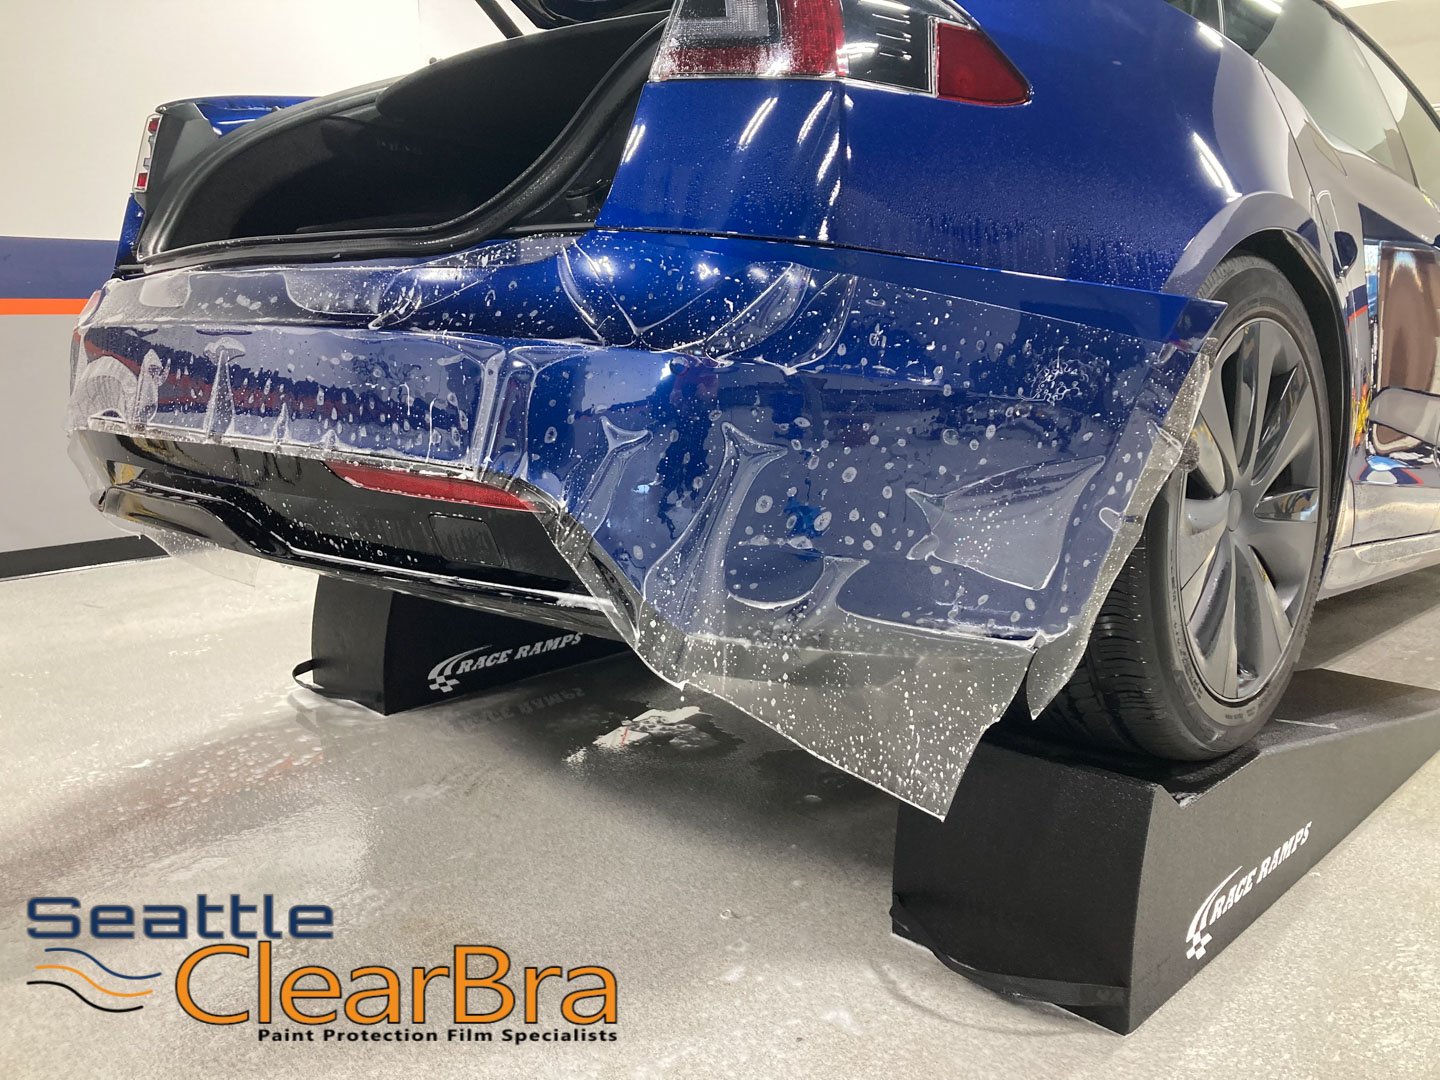 seattle-clearbra-xpel-ultimate-plus-fusion-stealth-prime-redmond-clear-bra-ppf-paint-protectio...jpg